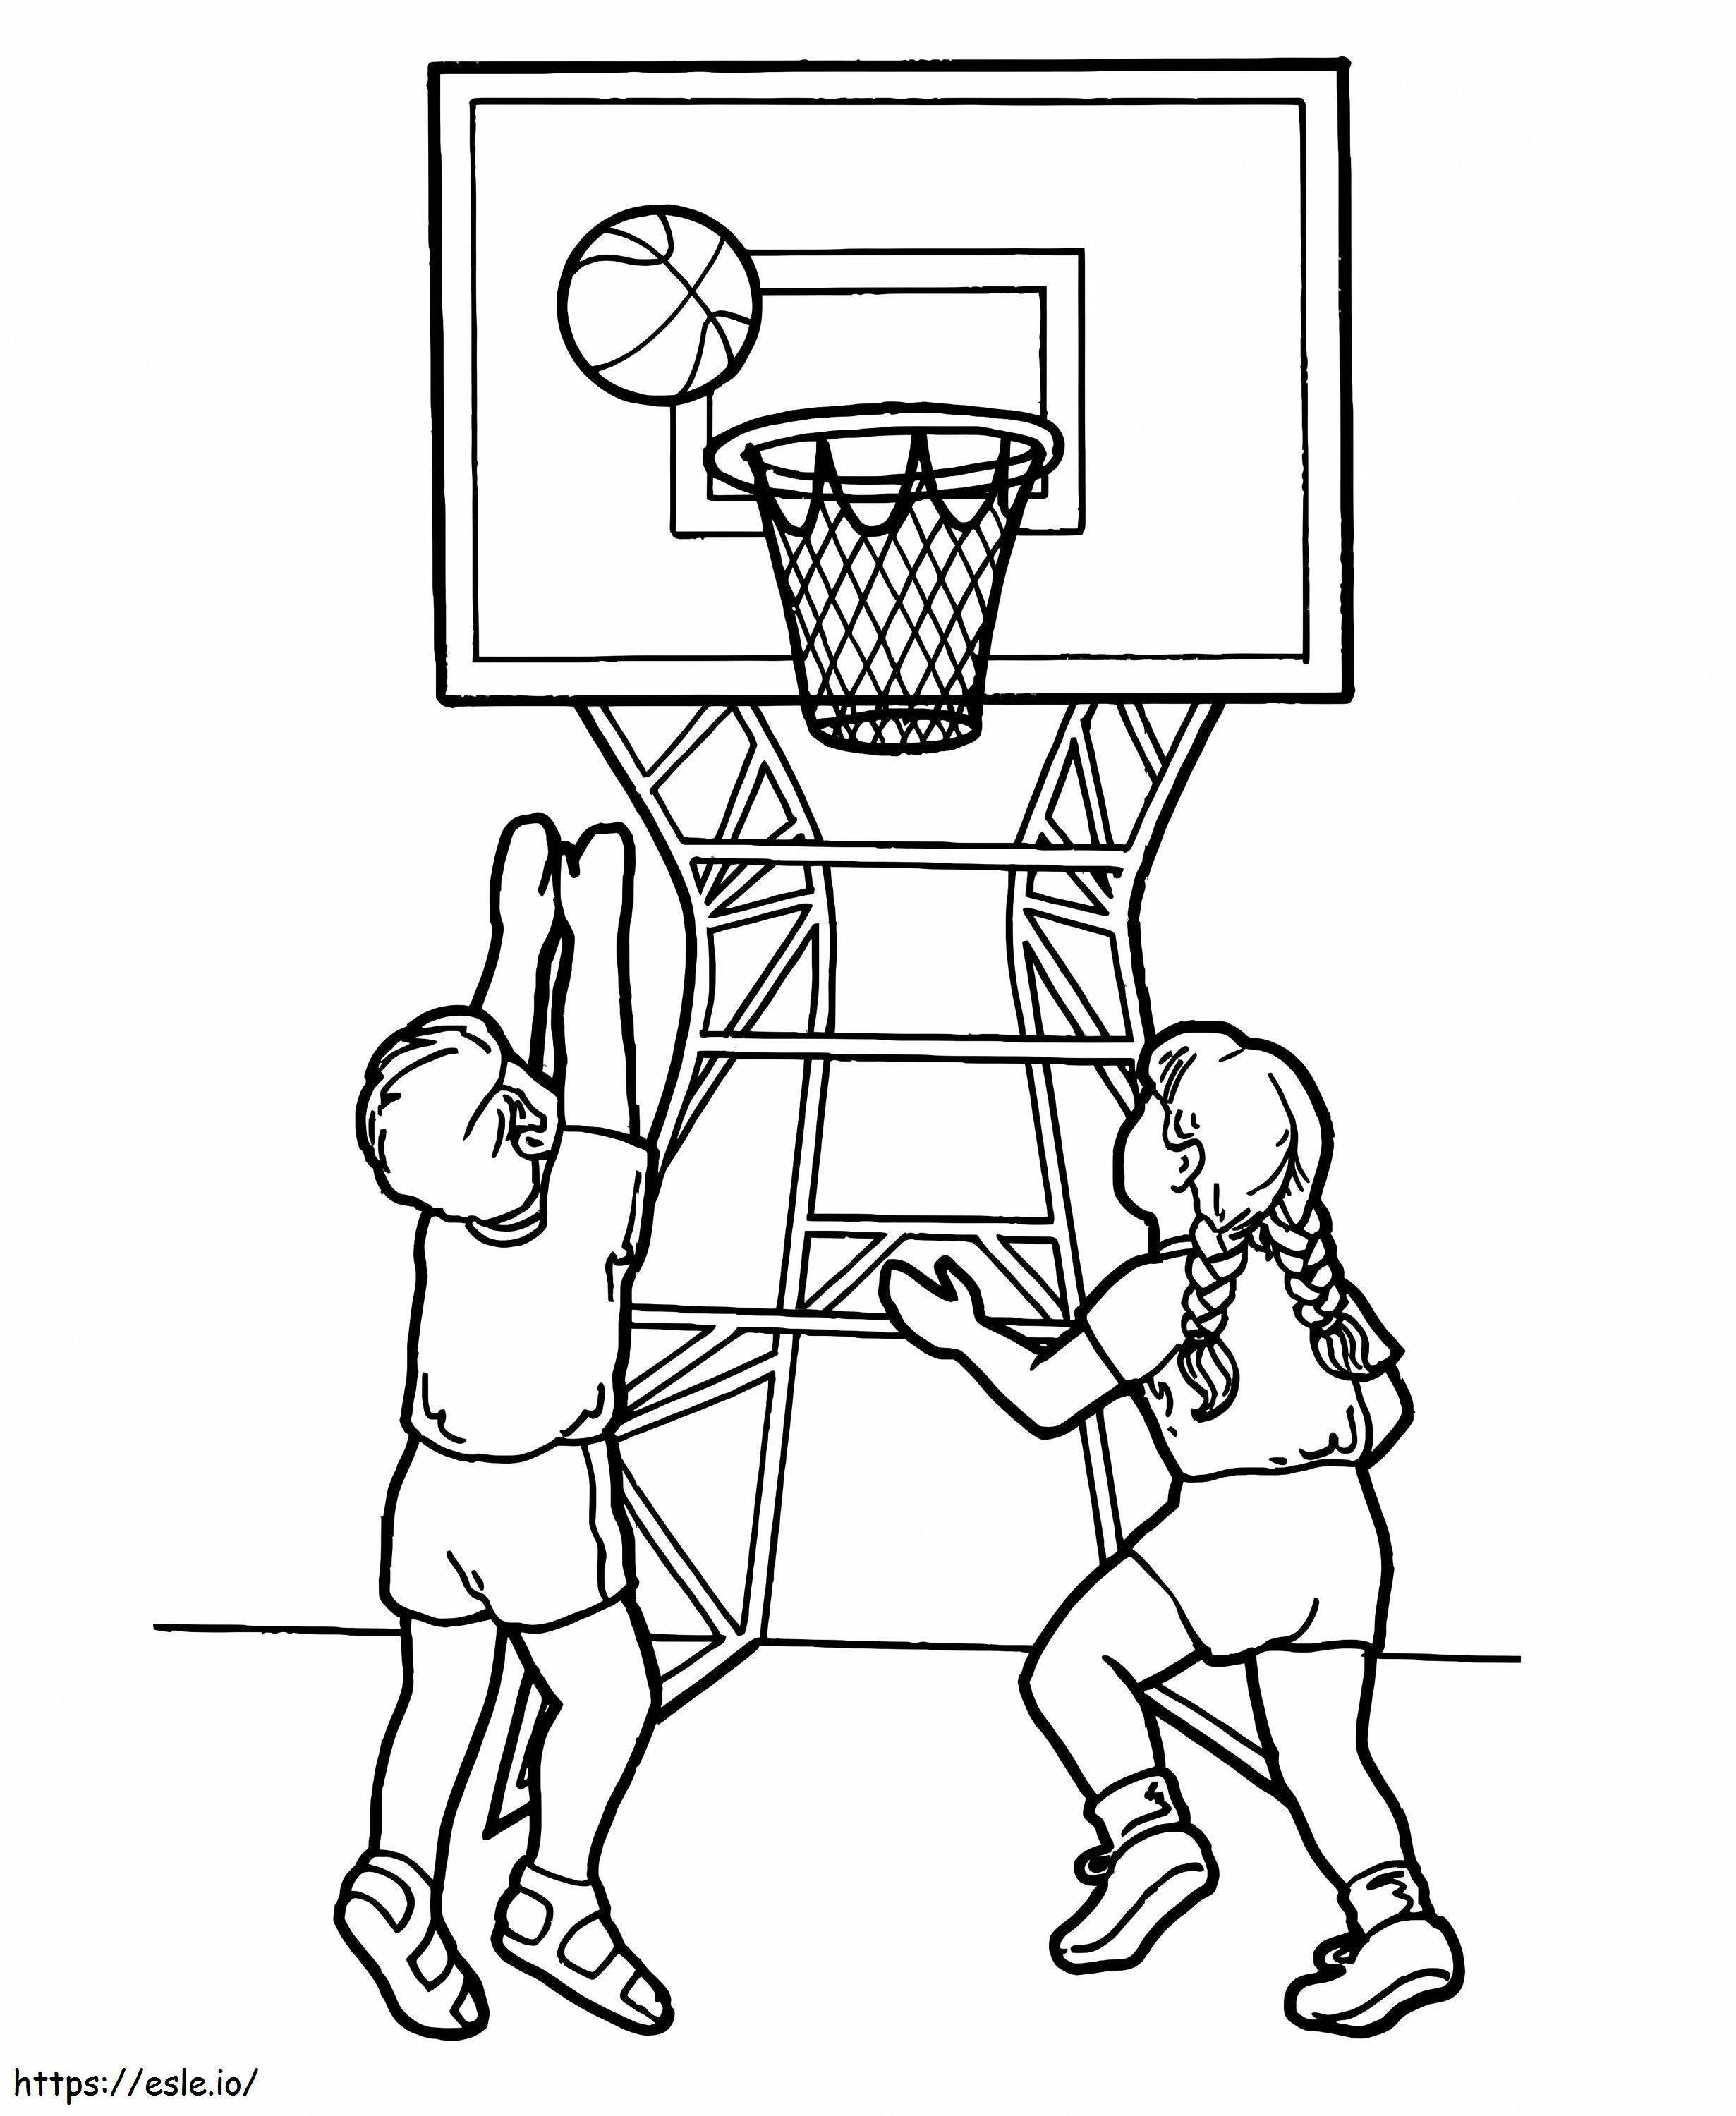 Two Children Playing Basketball coloring page